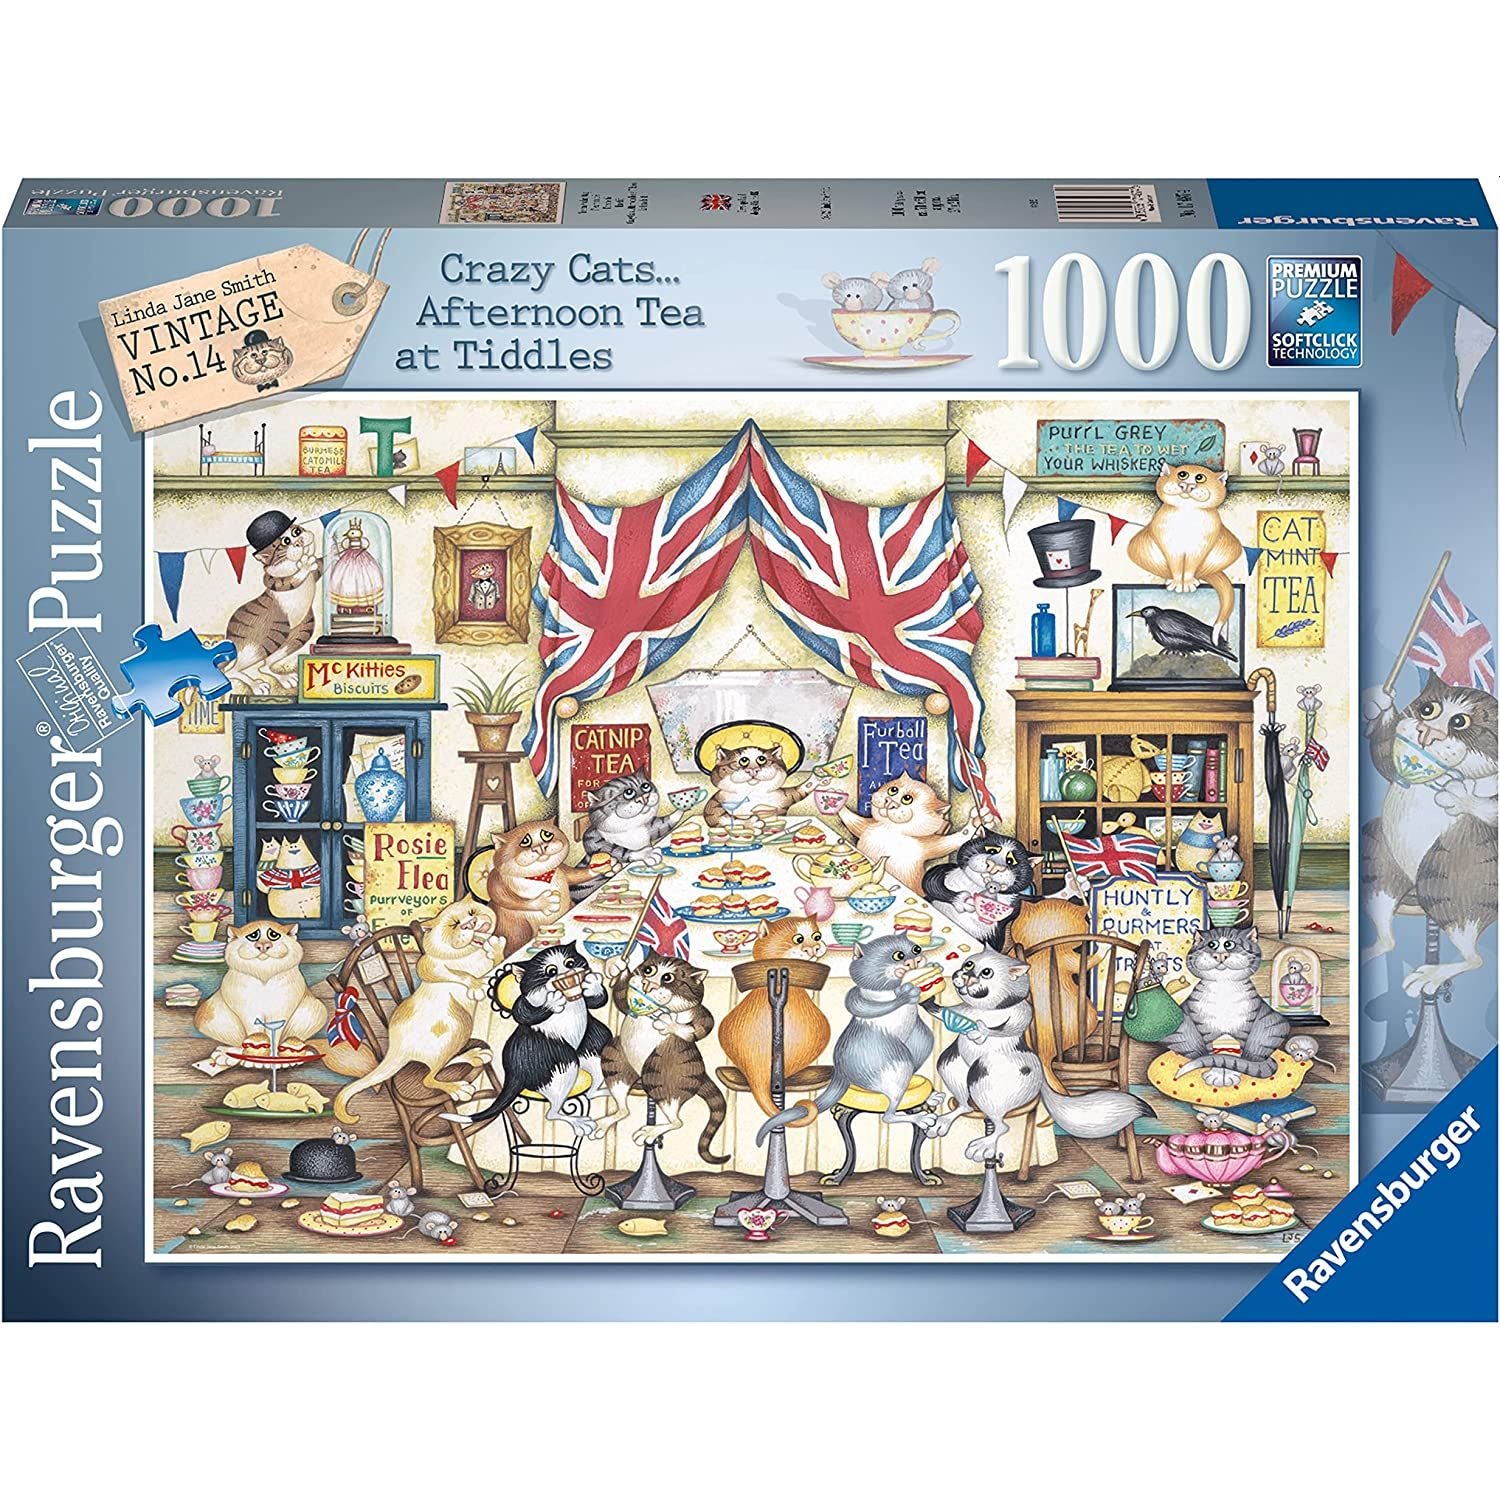 Crazy Cats, Afternoon at Tiddles 1000 Piece Jigsaw